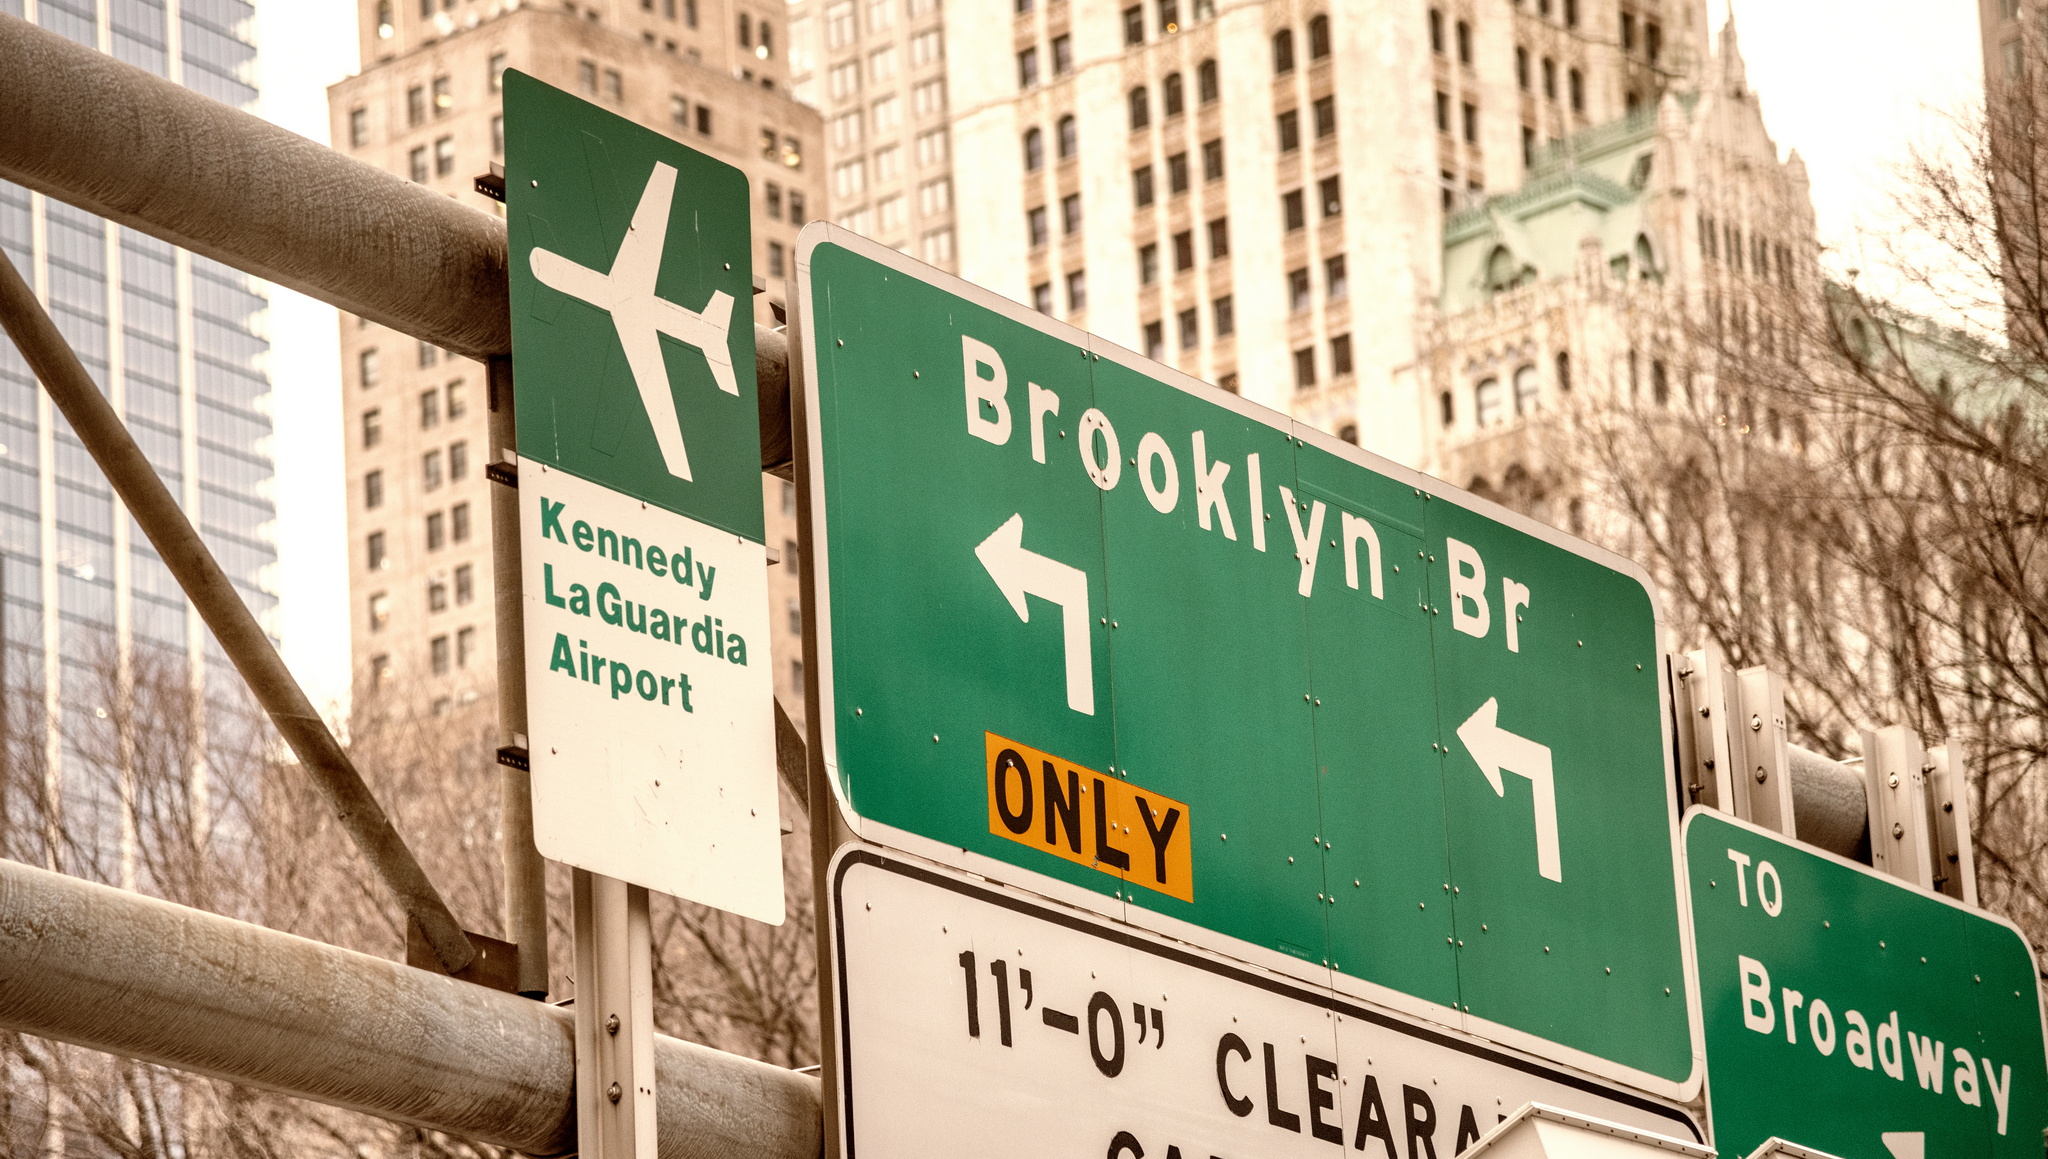 traffic sign indicating Kennedy LaGuardia airports. 